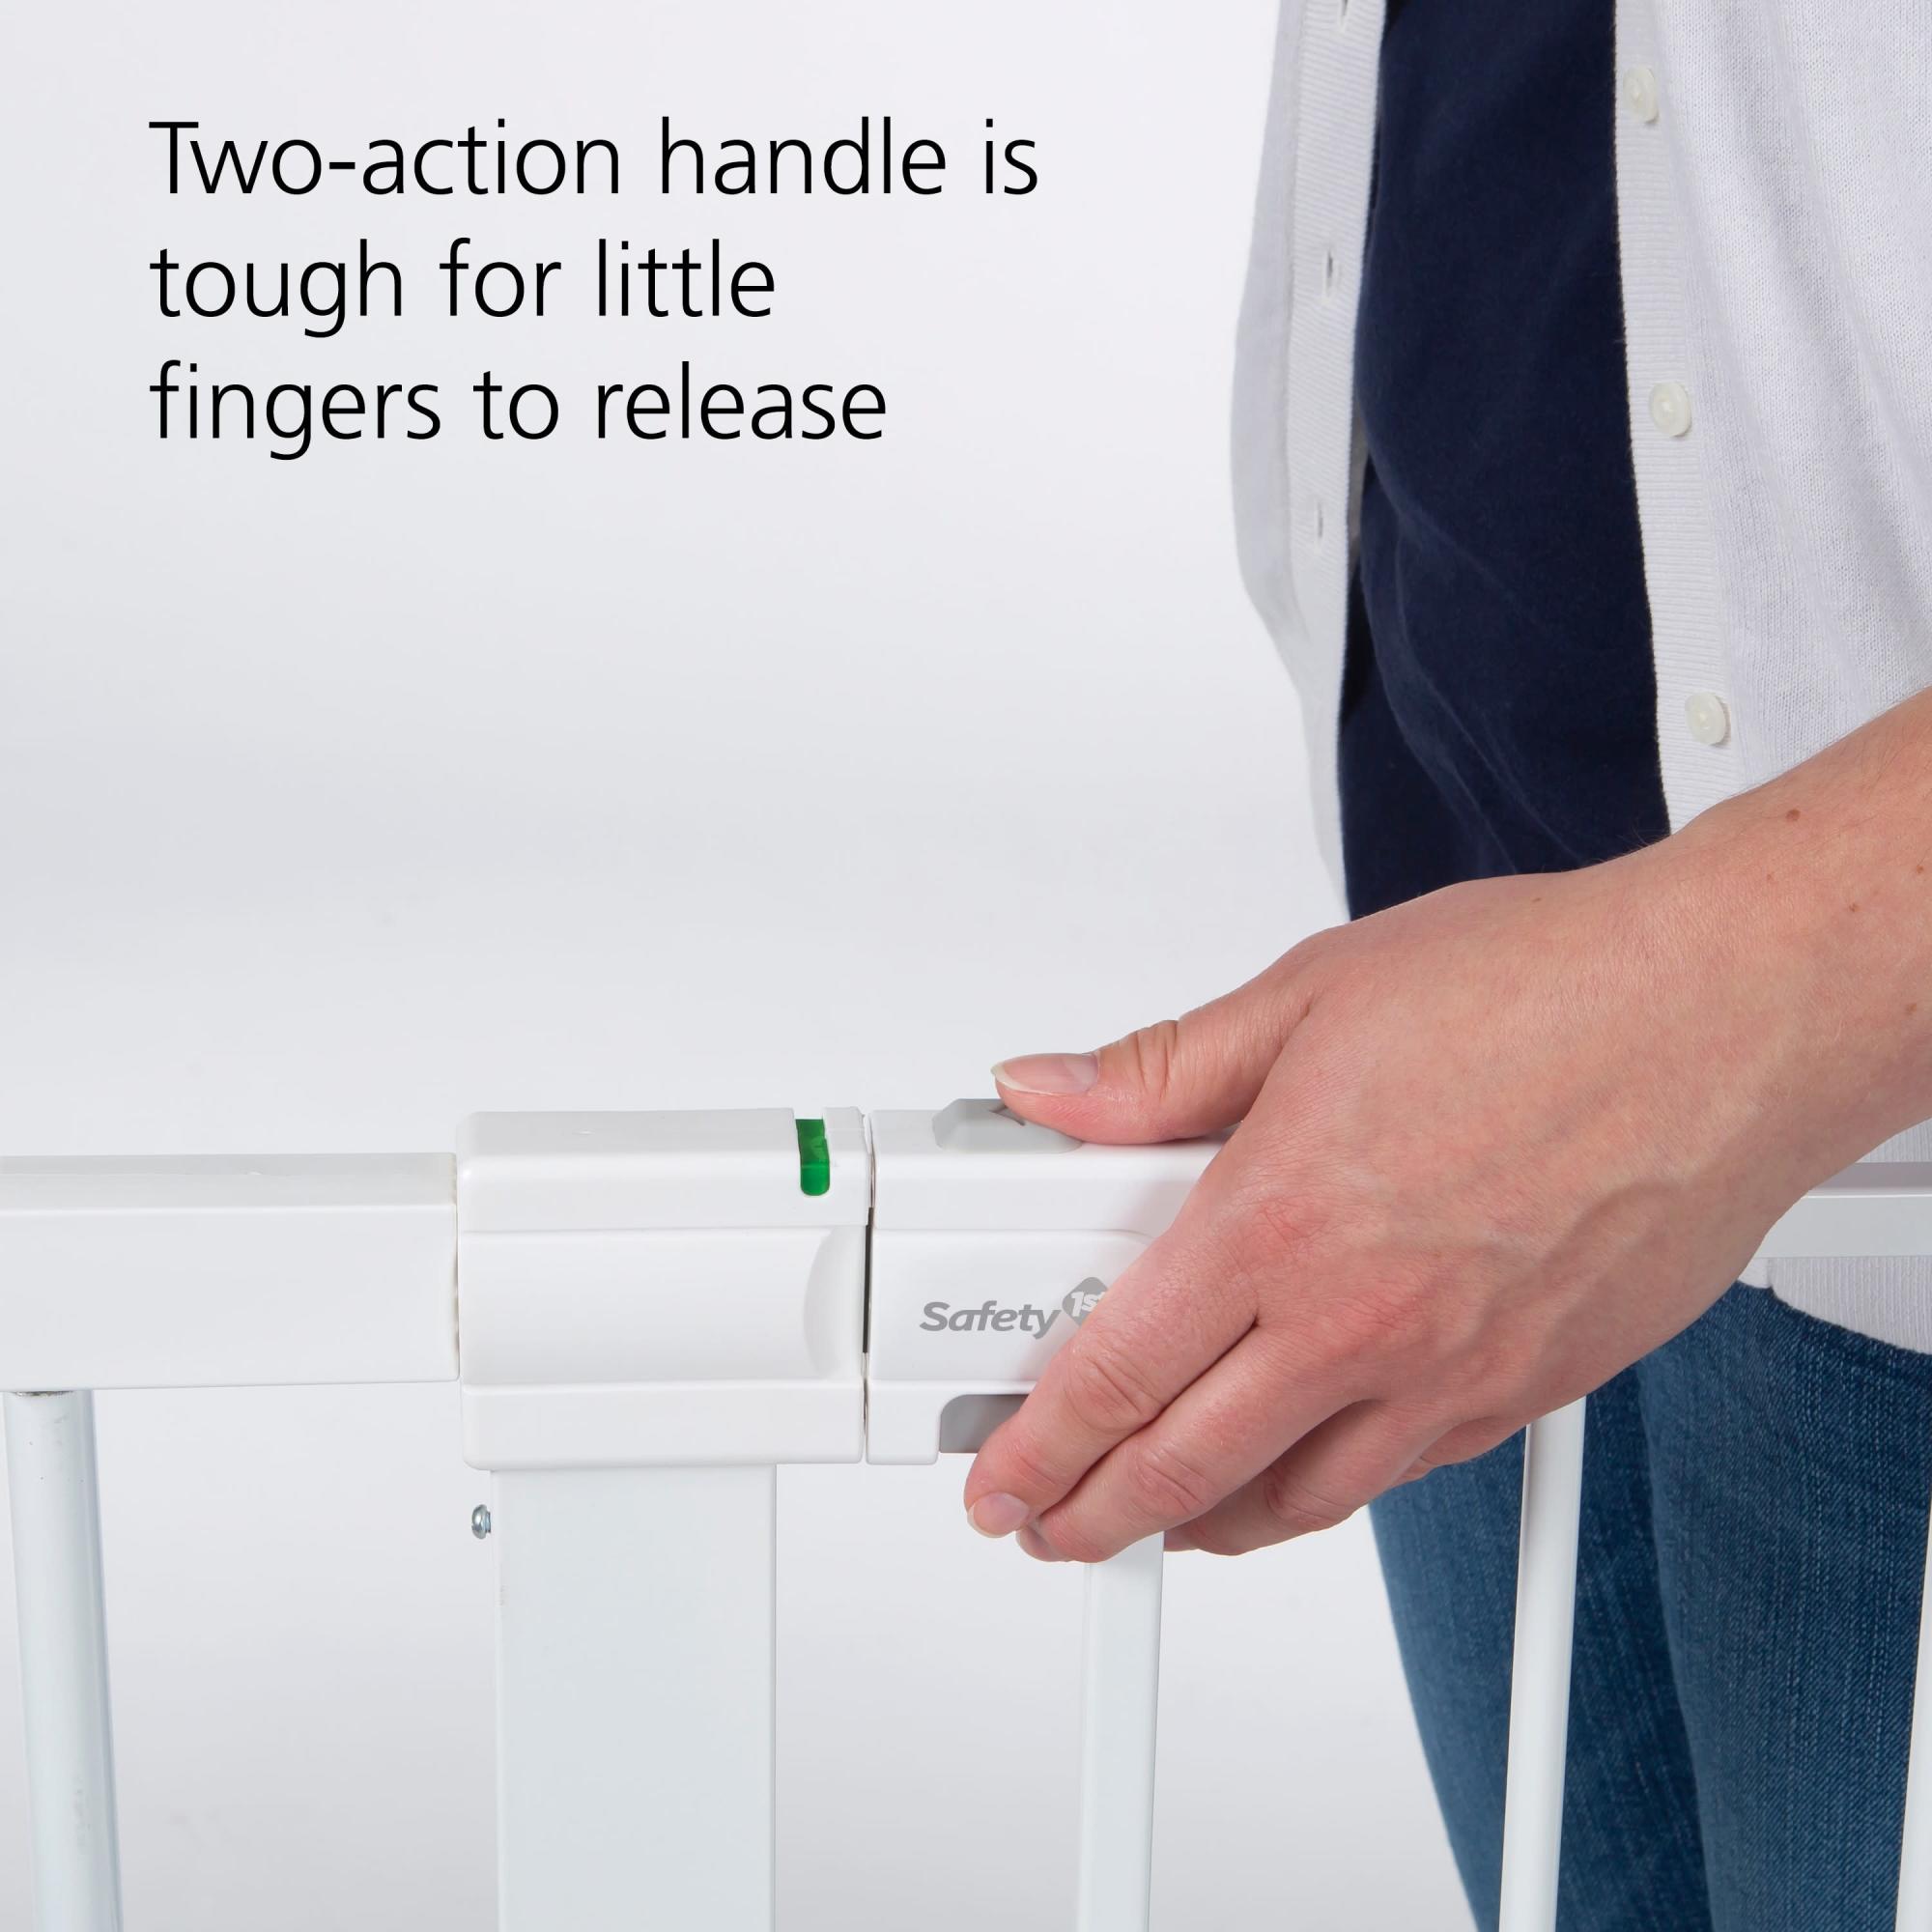 Two-Action handle is tough for little fingers to release